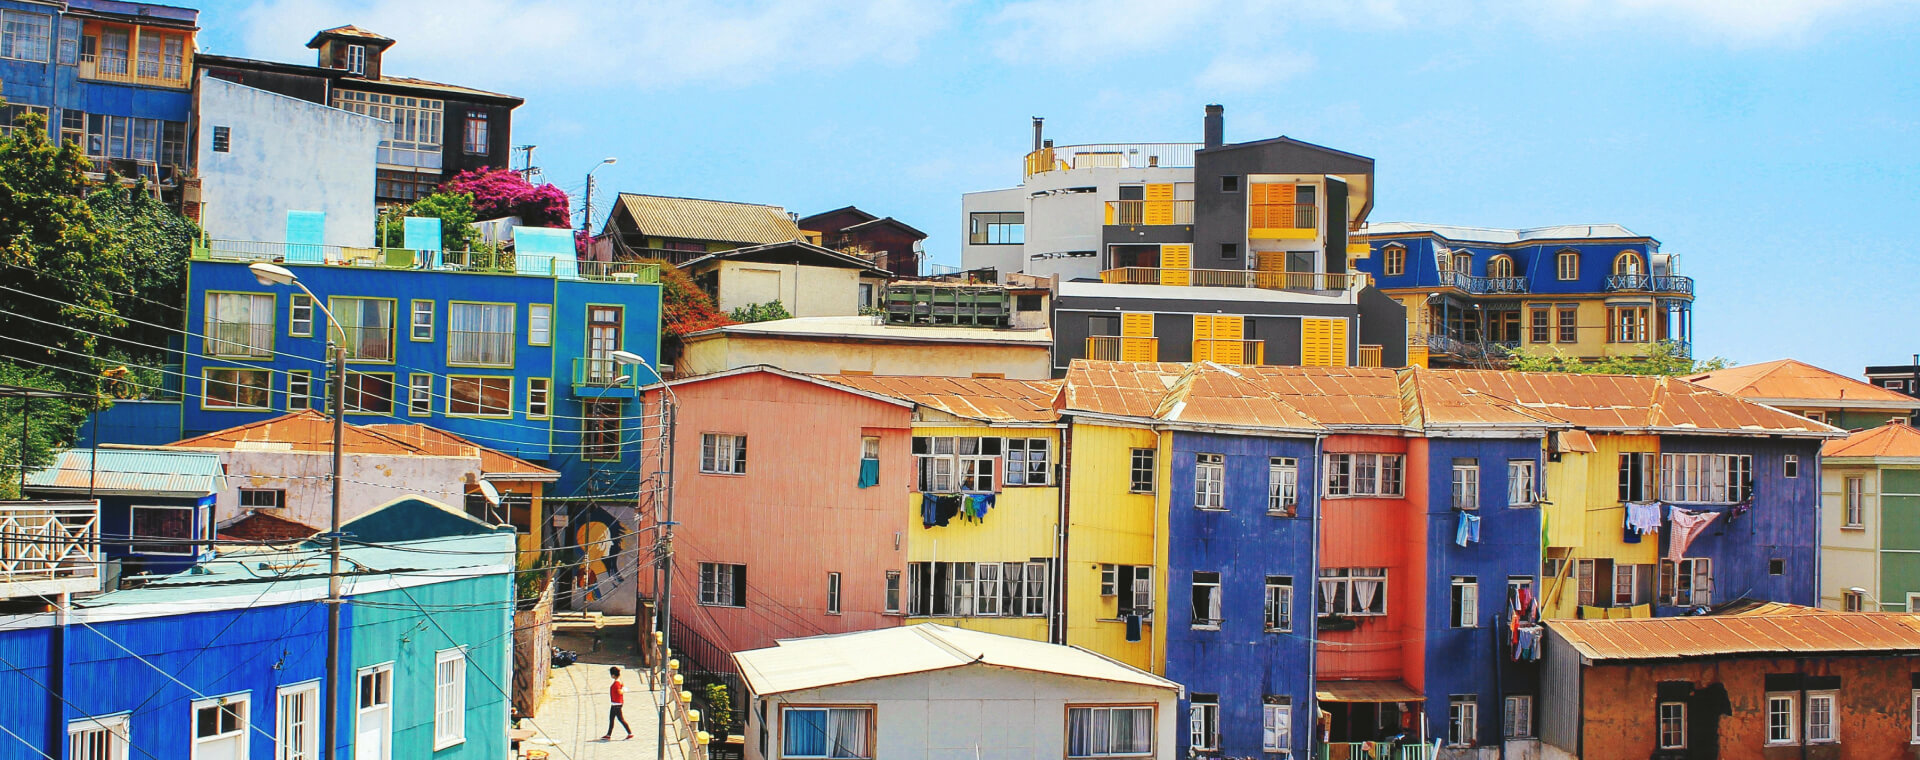 Colorful houses on a hillside.